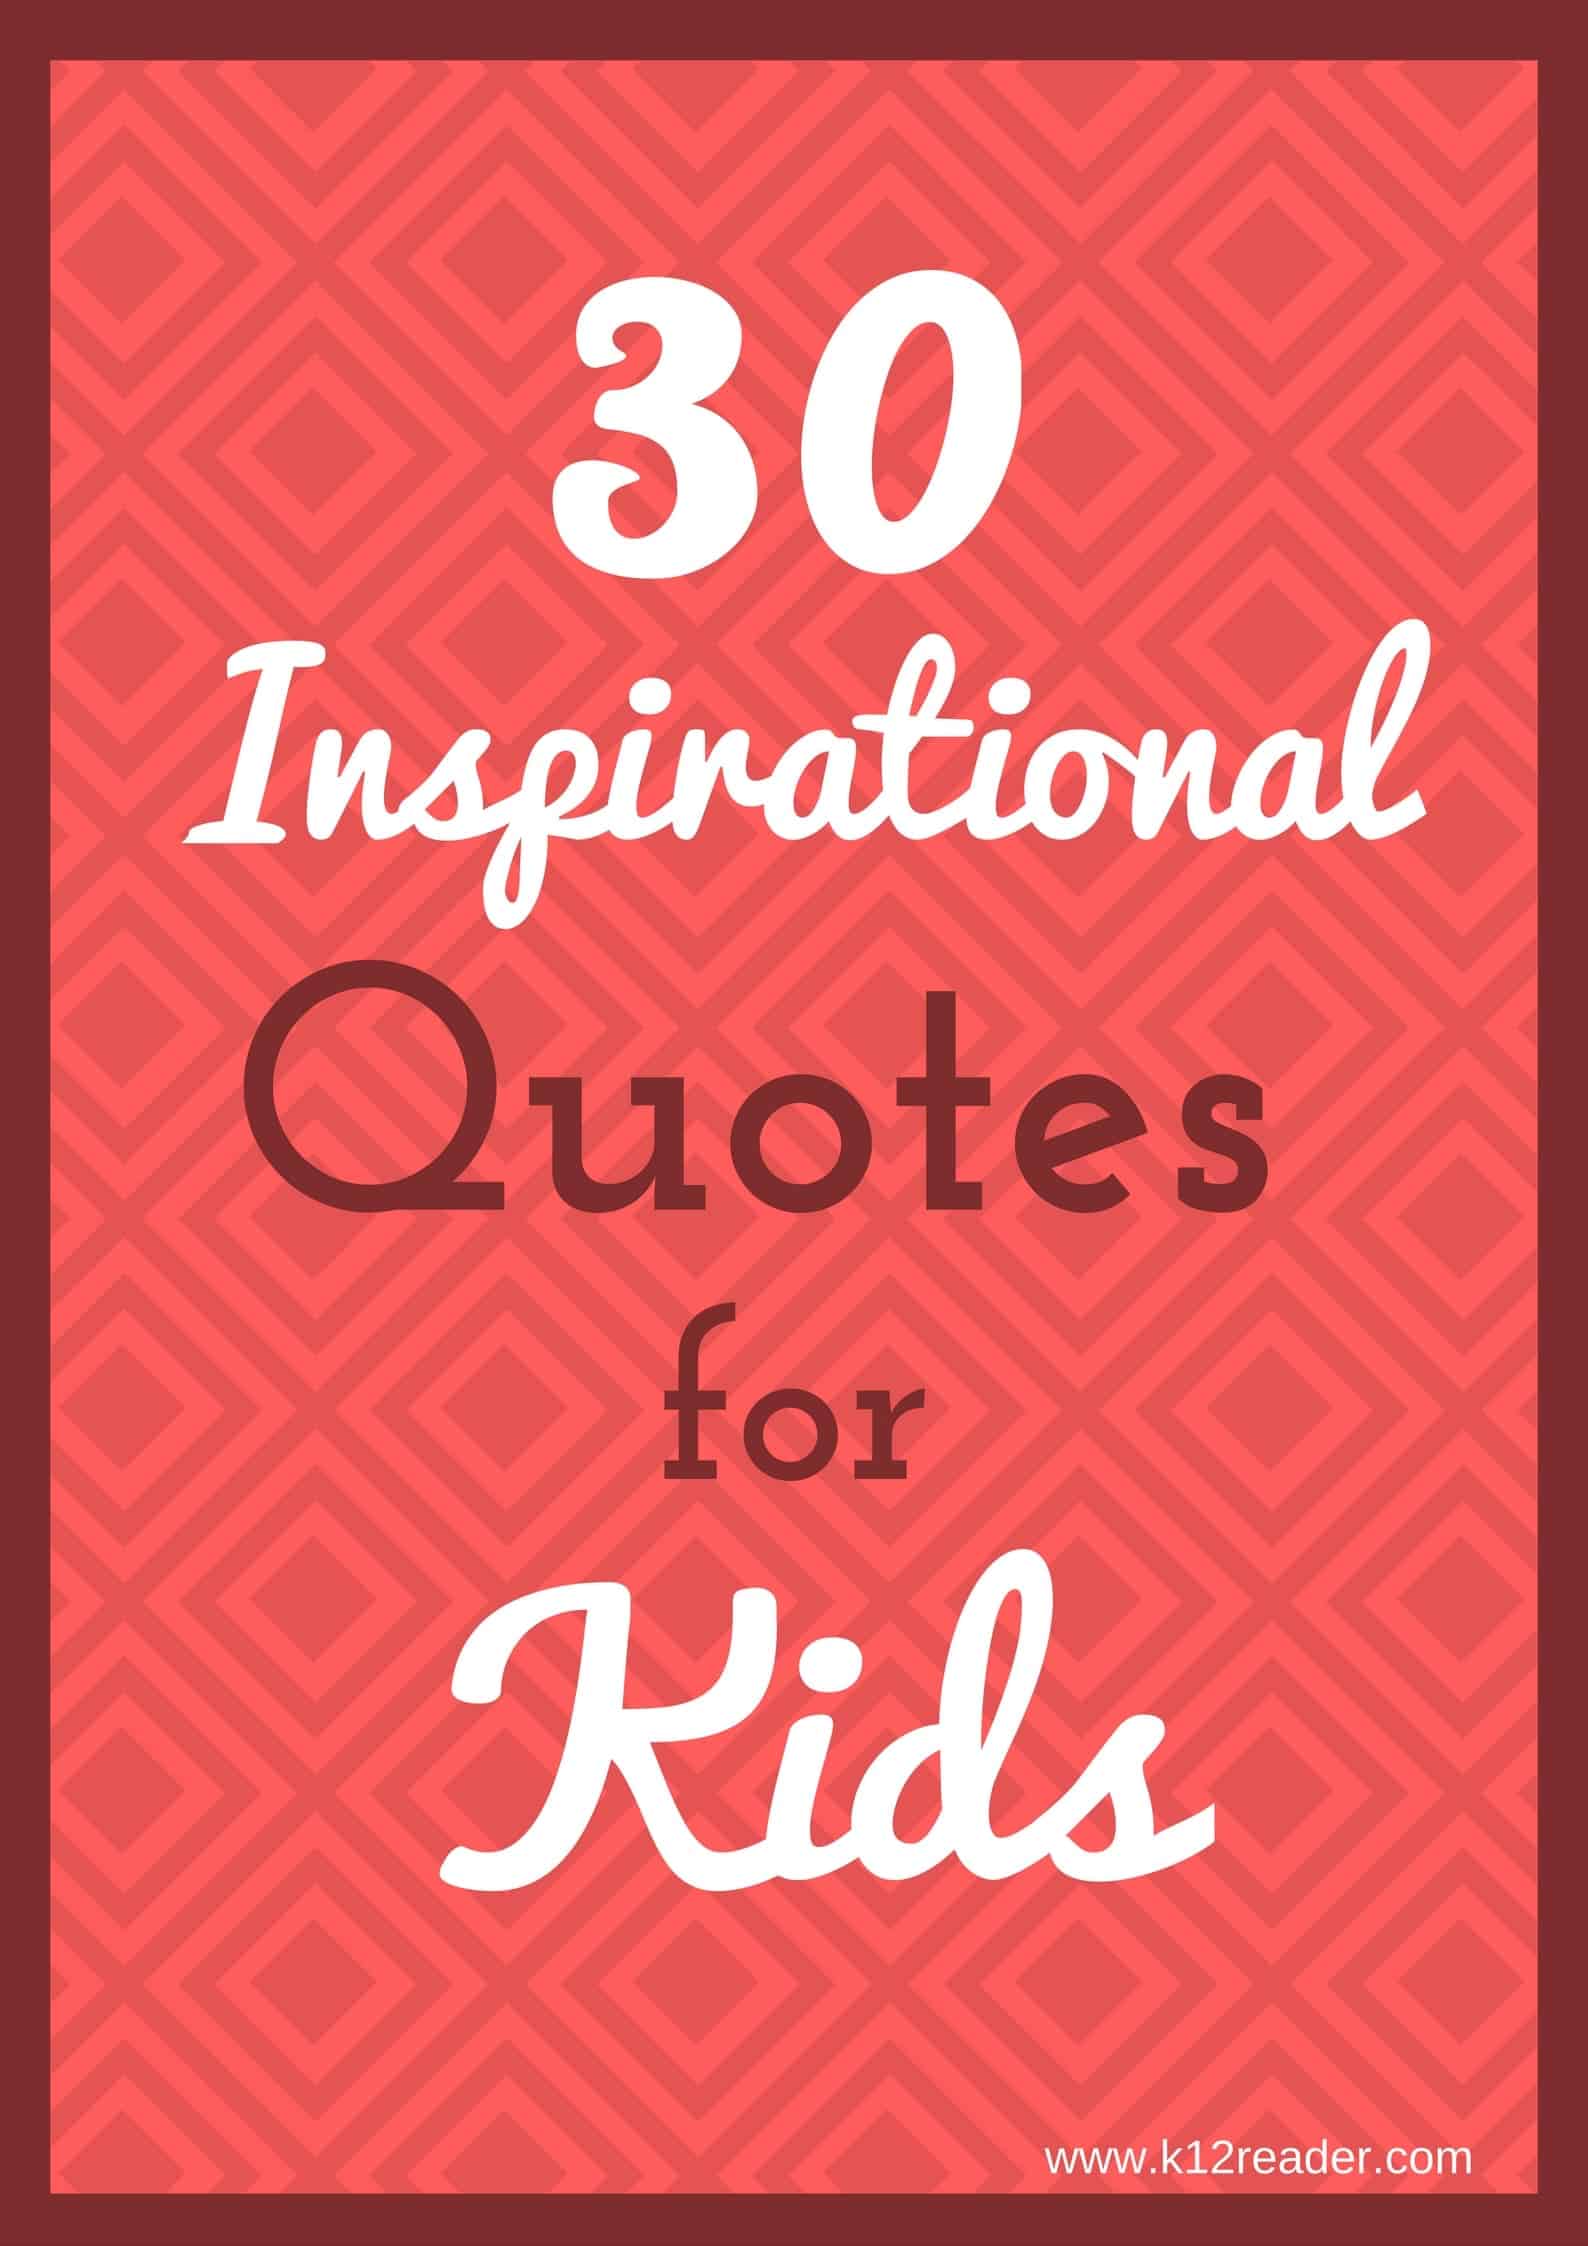 Inspirational Quotes For Kids 